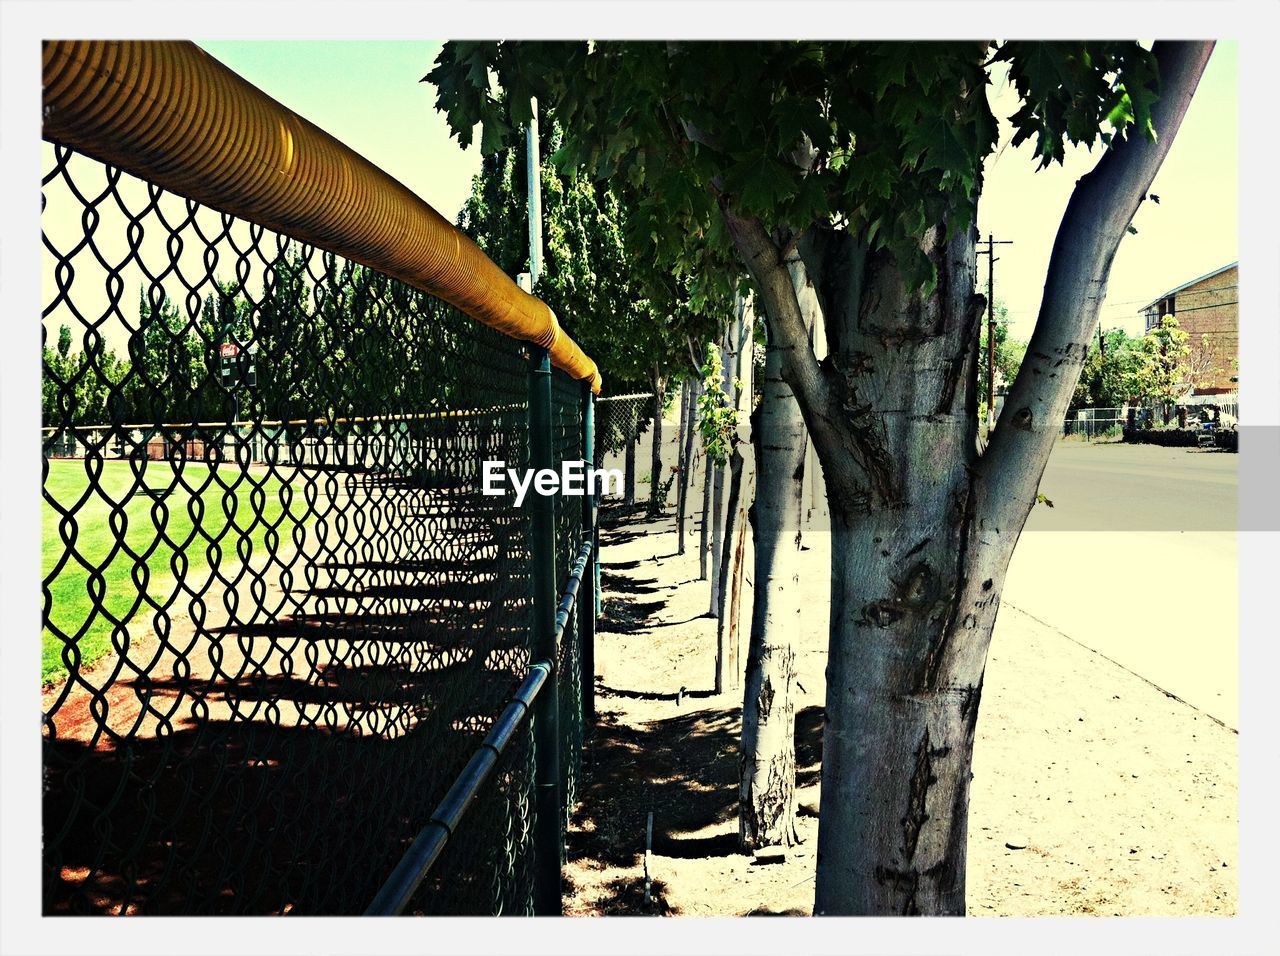 Trees on sidewalk by chainlink fence